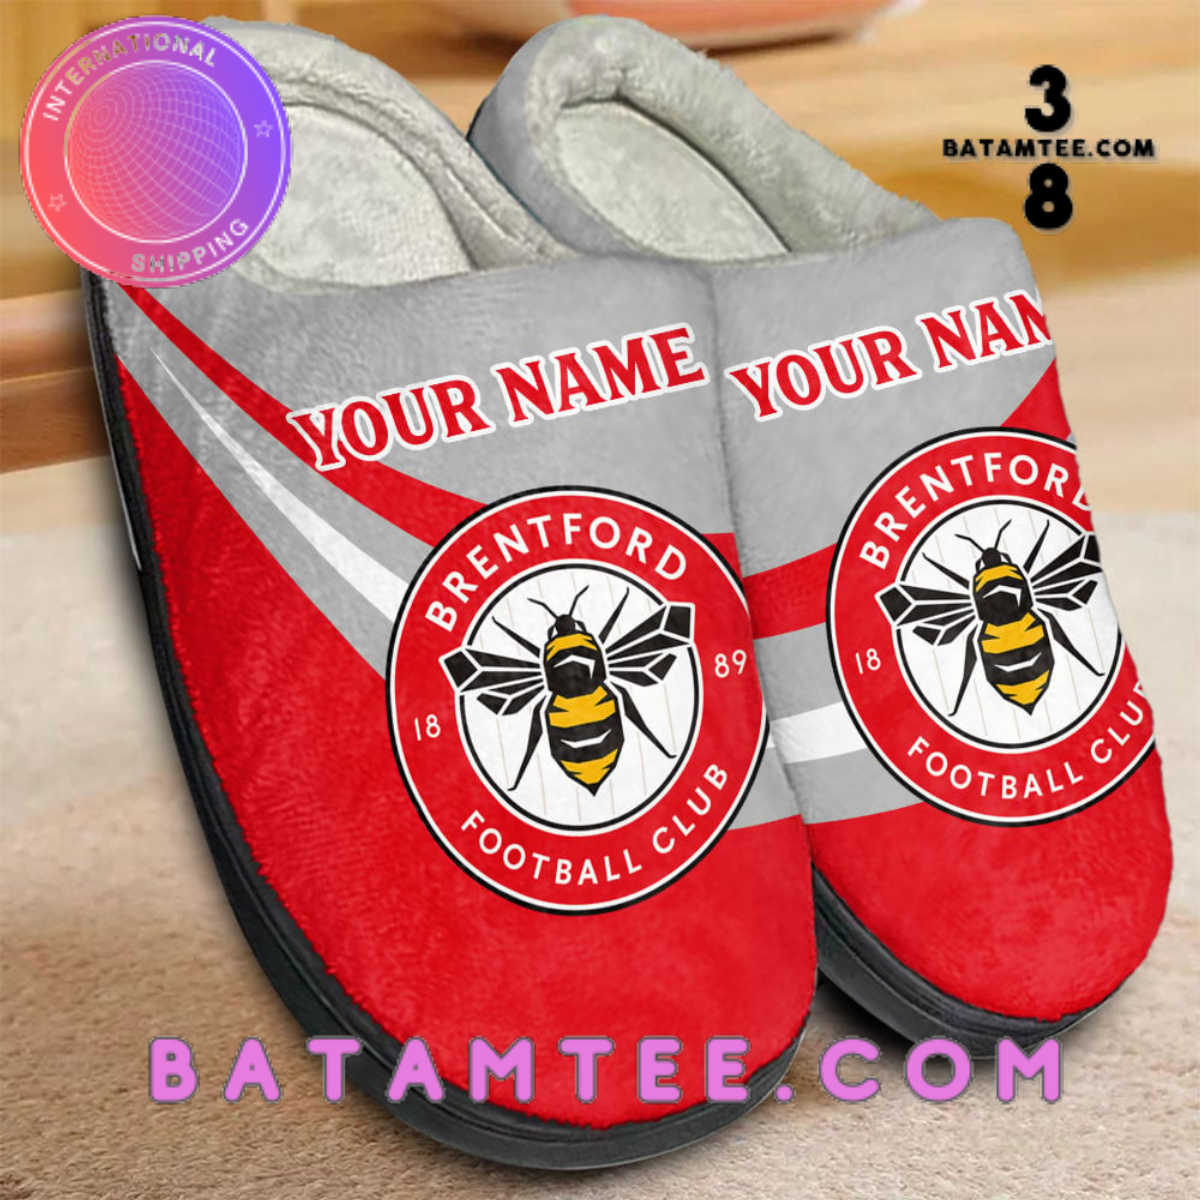 Personalized House Slippers for Brentford FC fans - Limited Edition